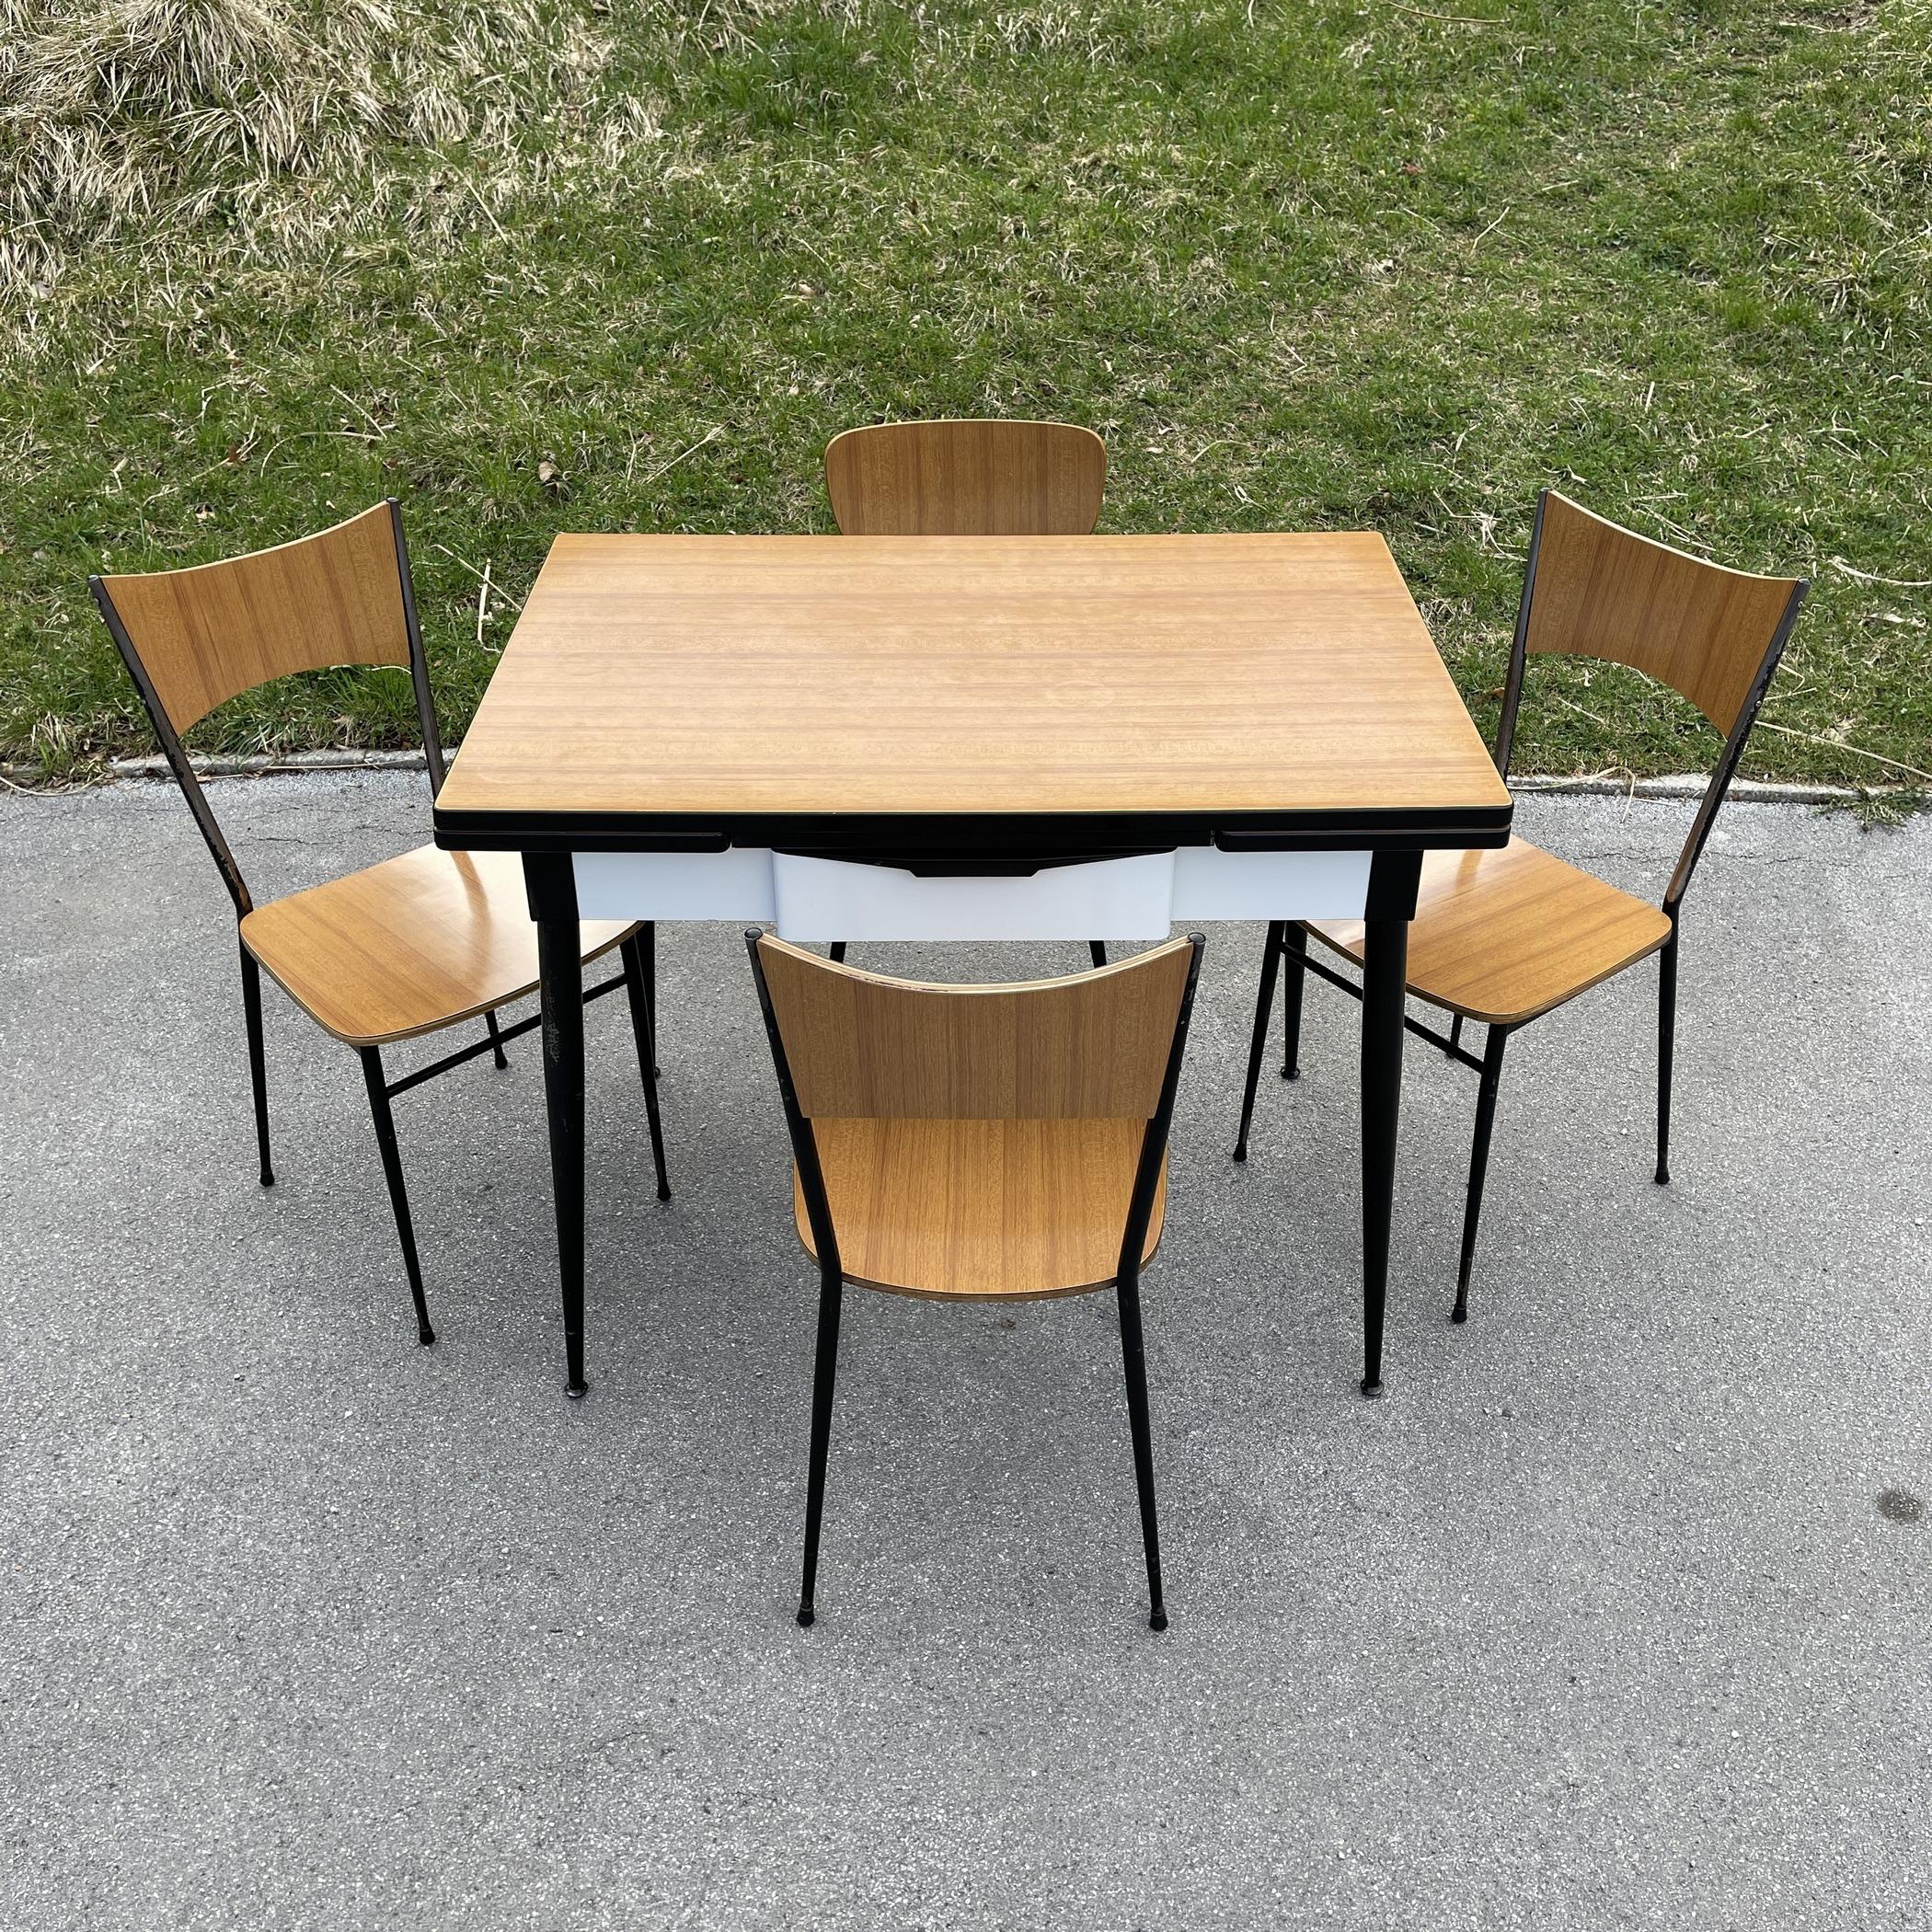 Mid-century dining table and 4 chairs by Salvarani Depositato made in Italy in the 1950s The design is fantastical 'aviator'.

The desktop is made from Formica and shows only light wear and tear despite its age.
To the sides there are recessed